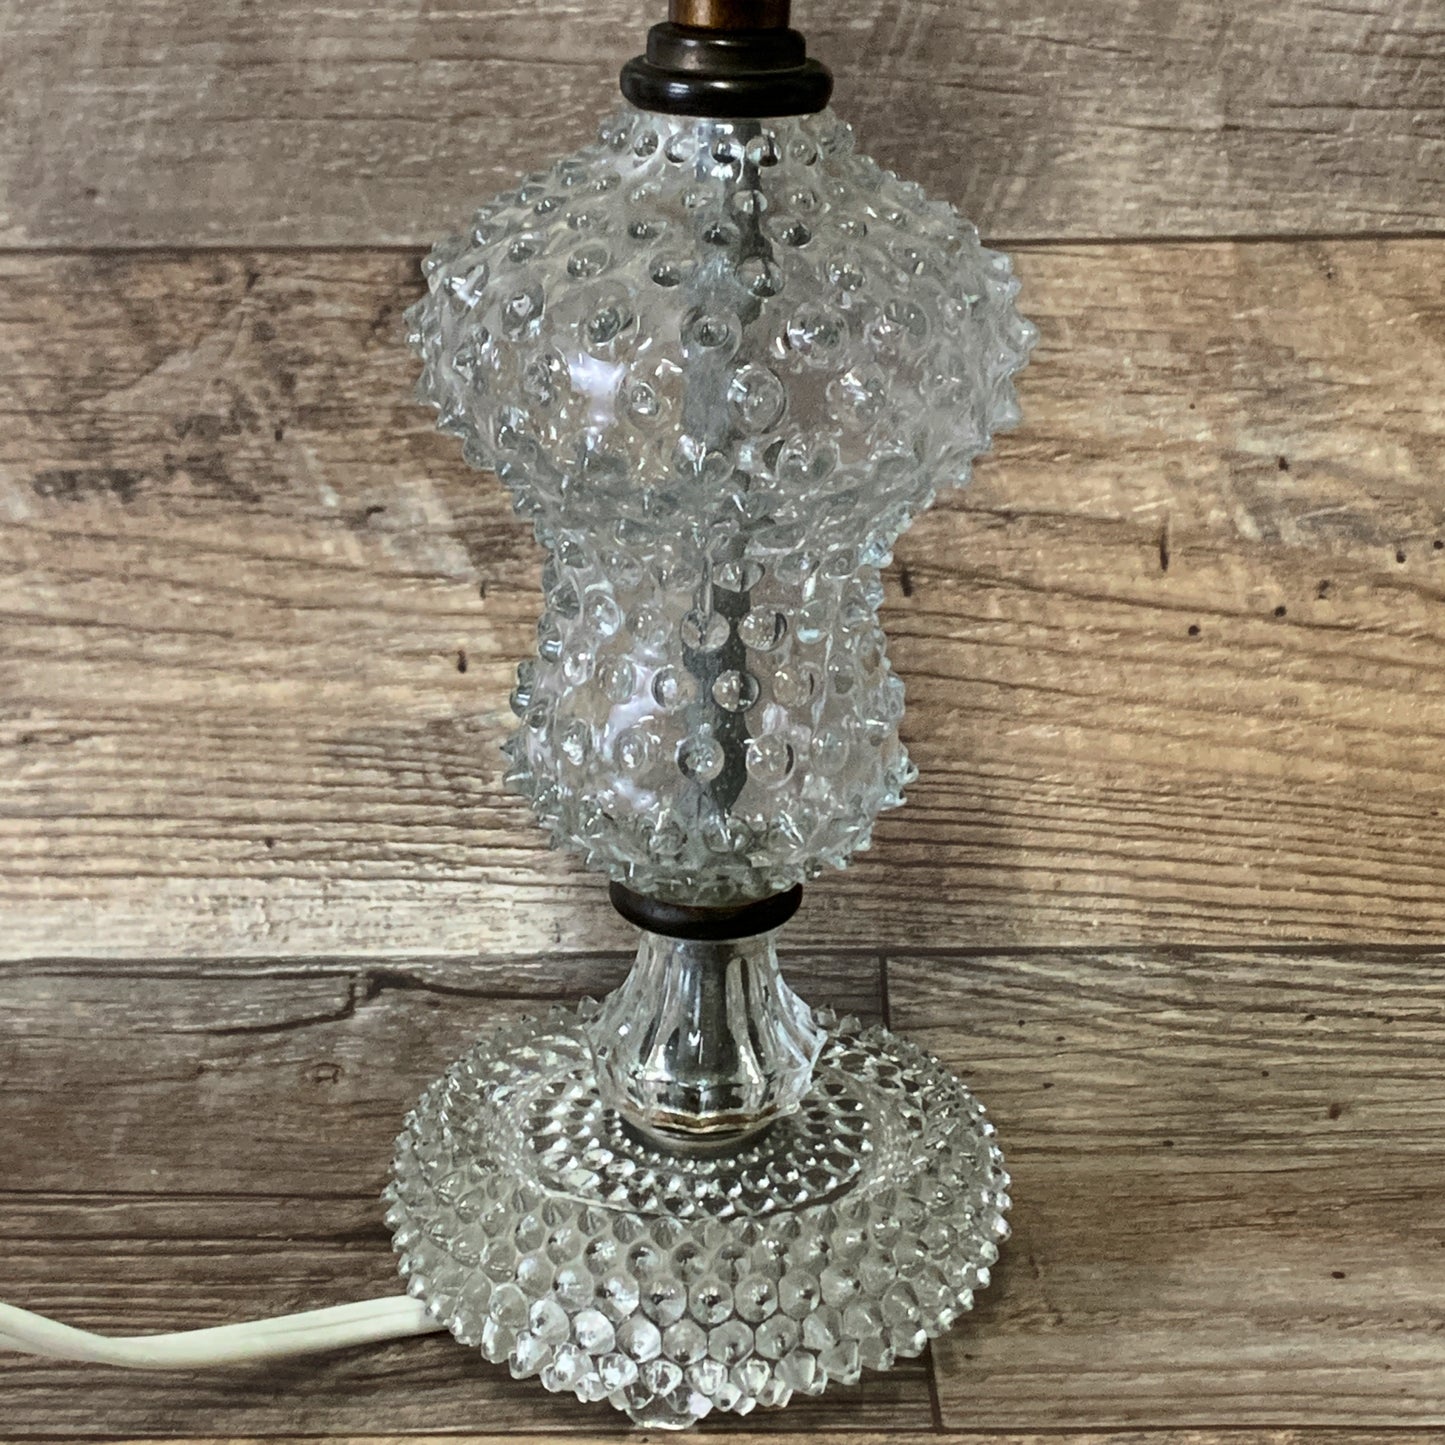 Clear Glass Lamp with Pointy Hobnail Pattern - 2 Available